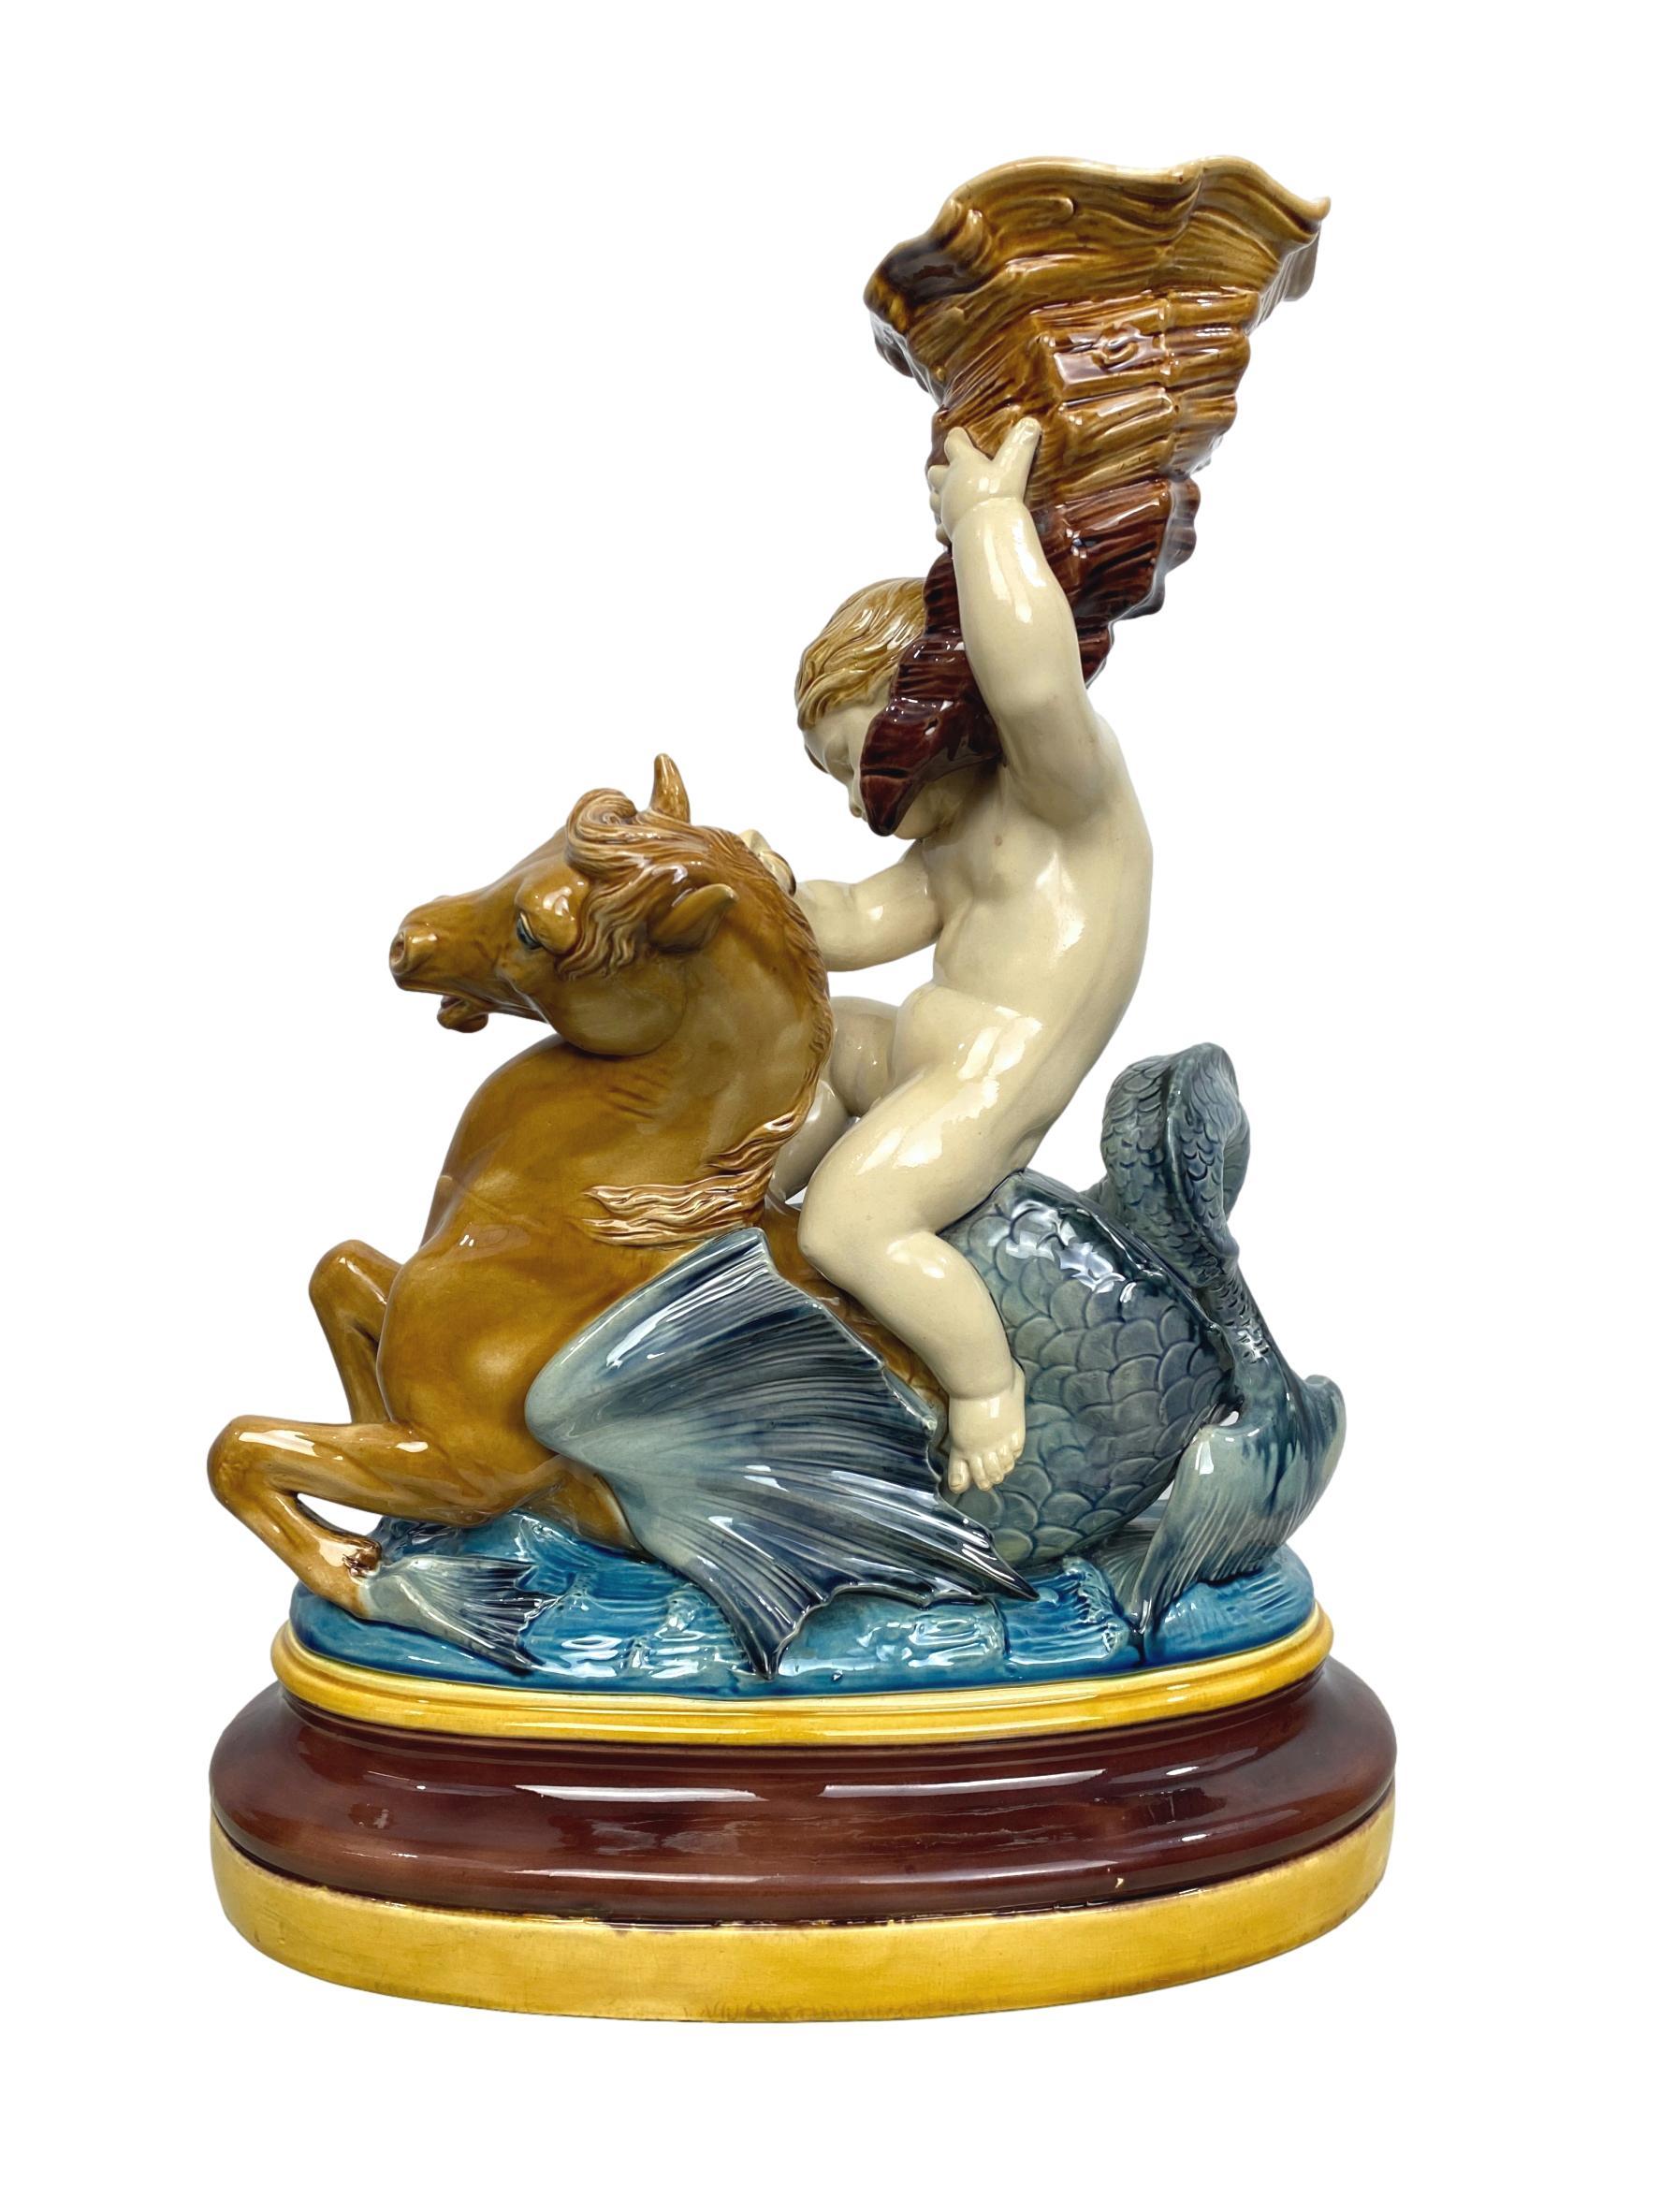 Victorian Minton Majolica Centerpiece Putto Riding Winged Seahorse, Dated 1864, H-17ins